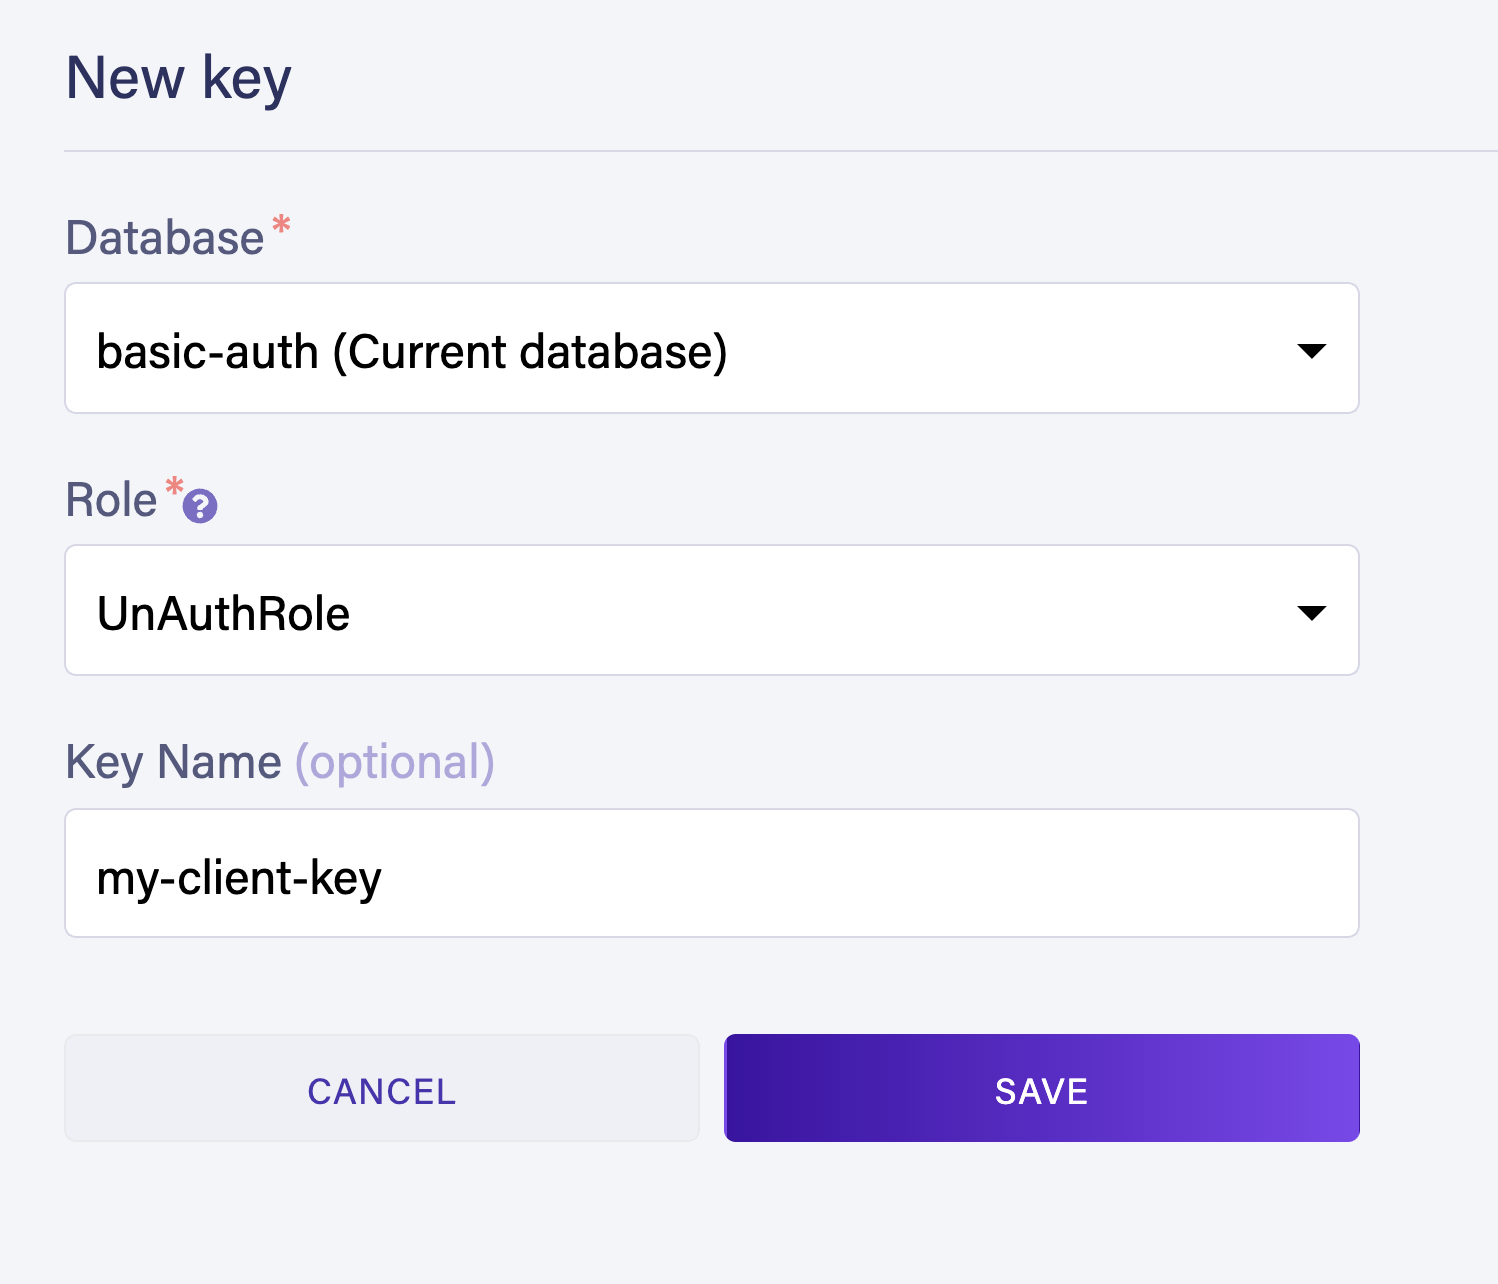 New key name and role configuration